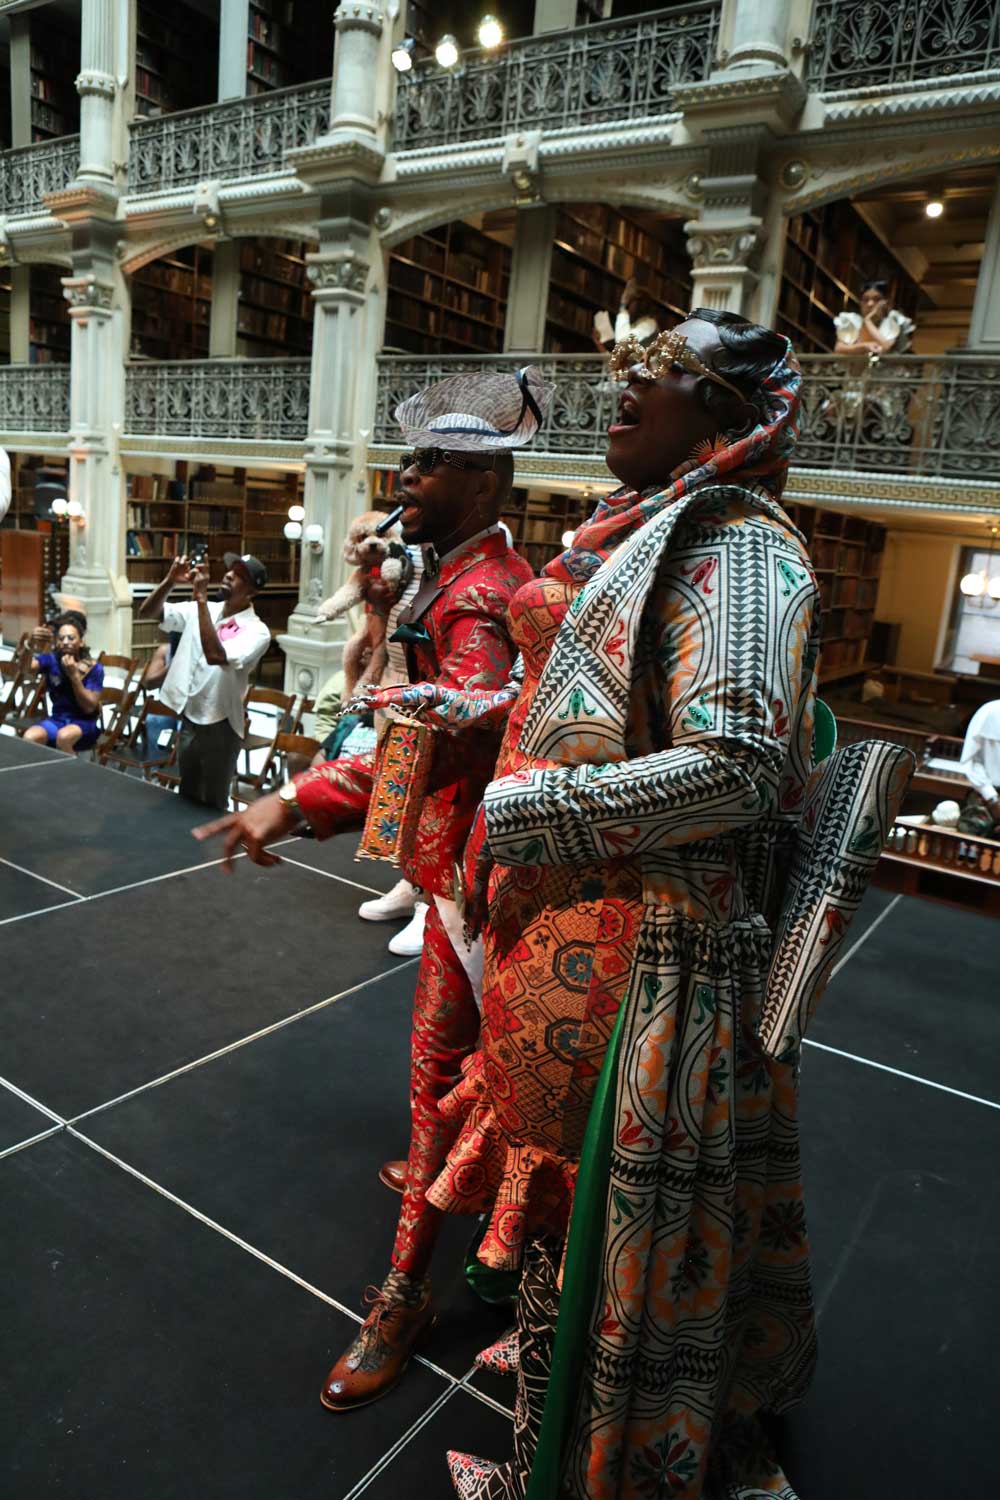 Two performers compete on the stage at the George Peabody Library